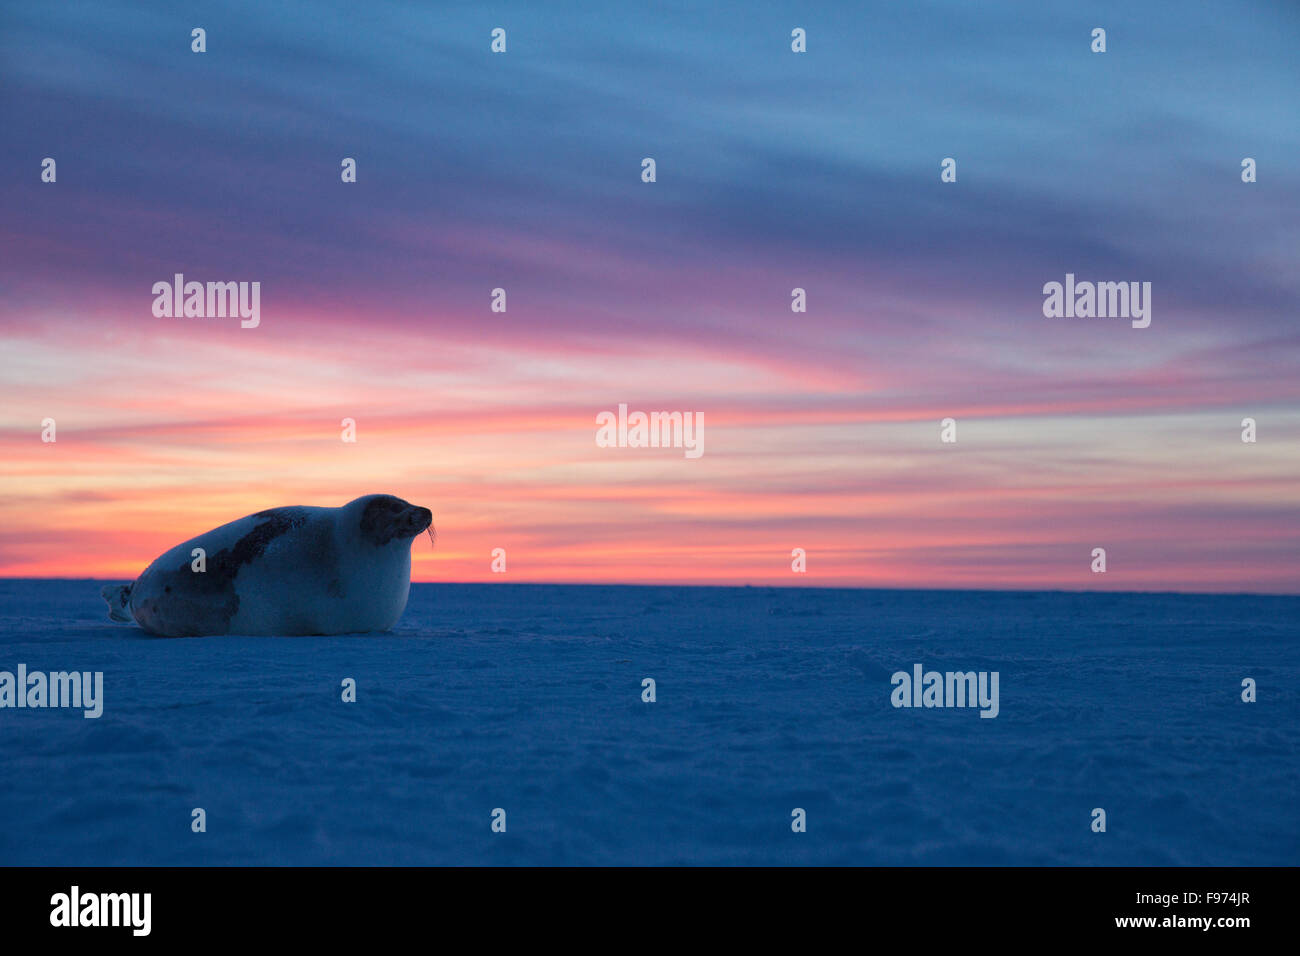 Harp seal (Pagophilus groenlandicus), adult female, on sea ice at sunset, Gulf of St. Lawrence, near Îles de la Madeleine Stock Photo